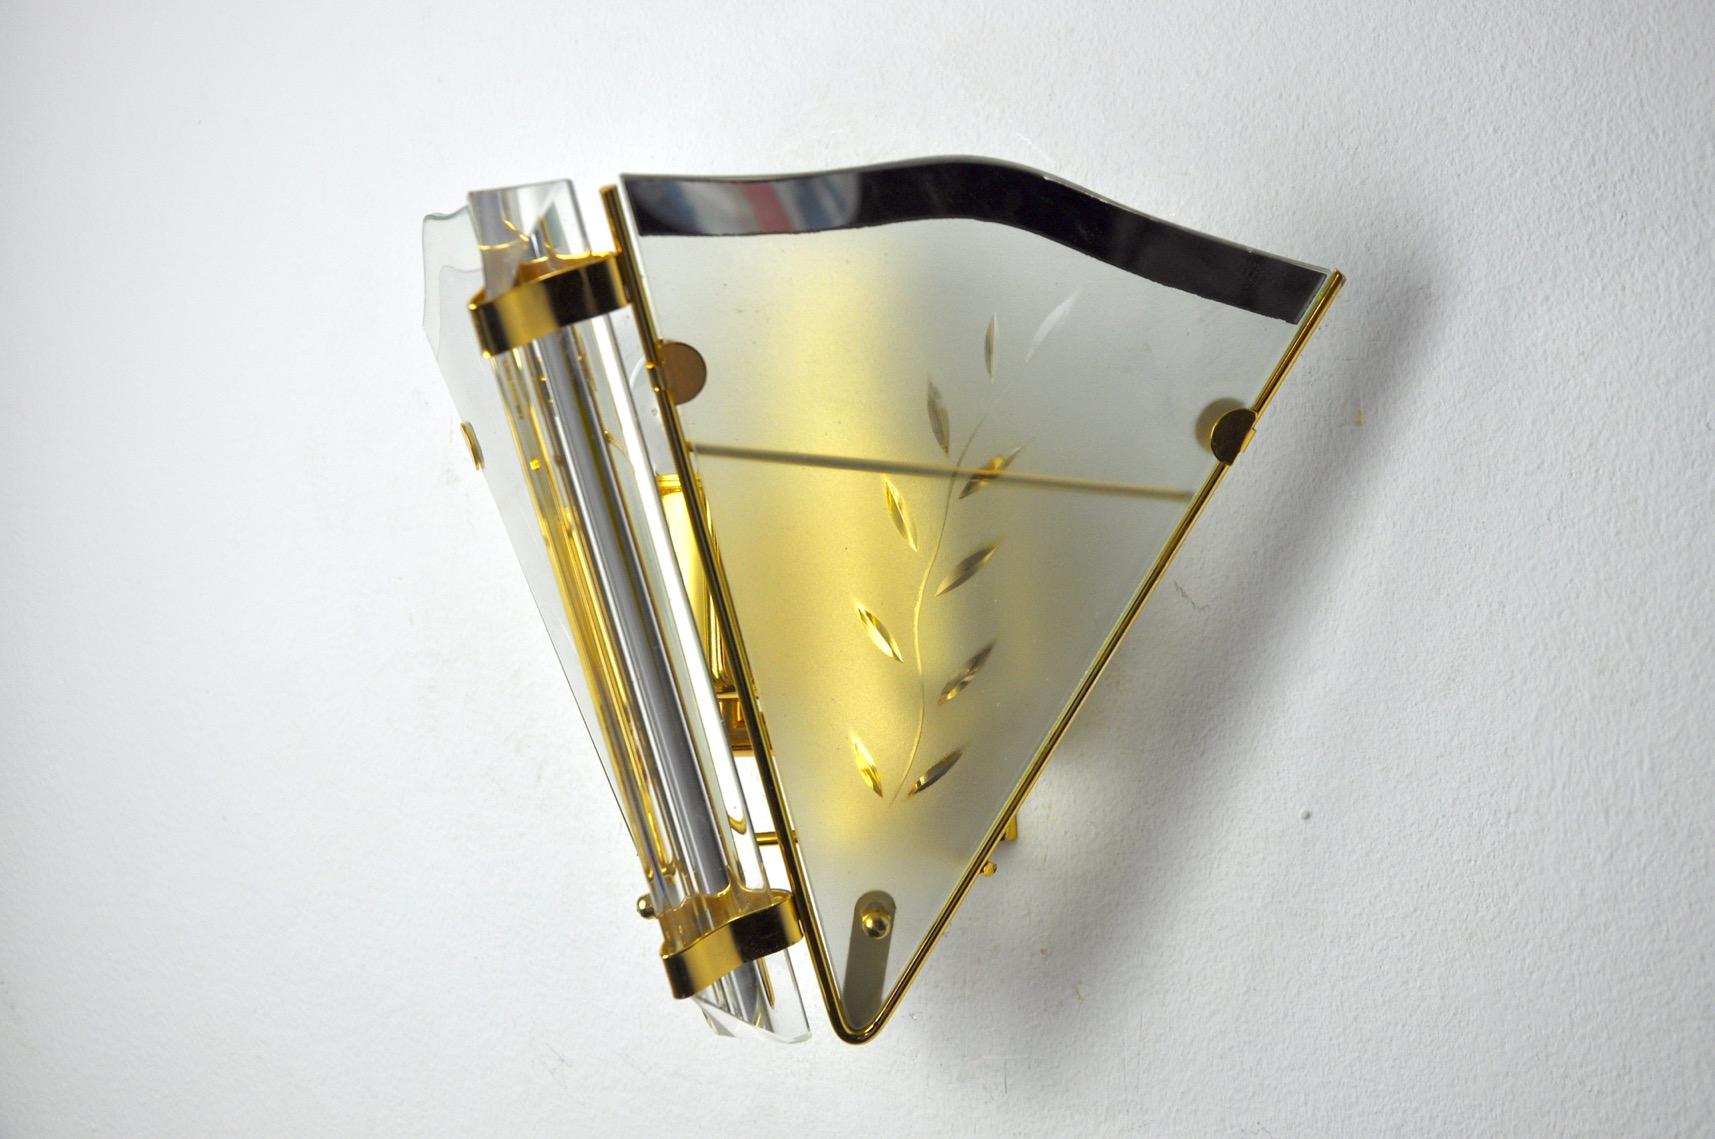 Very beautiful regency wall lamp produced in italy in the 80s. Engraved glass and gilded metal structure. Unique object that will illuminate wonderfully and bring a real design touch to your interior. Electricity checked, mark of time relating to